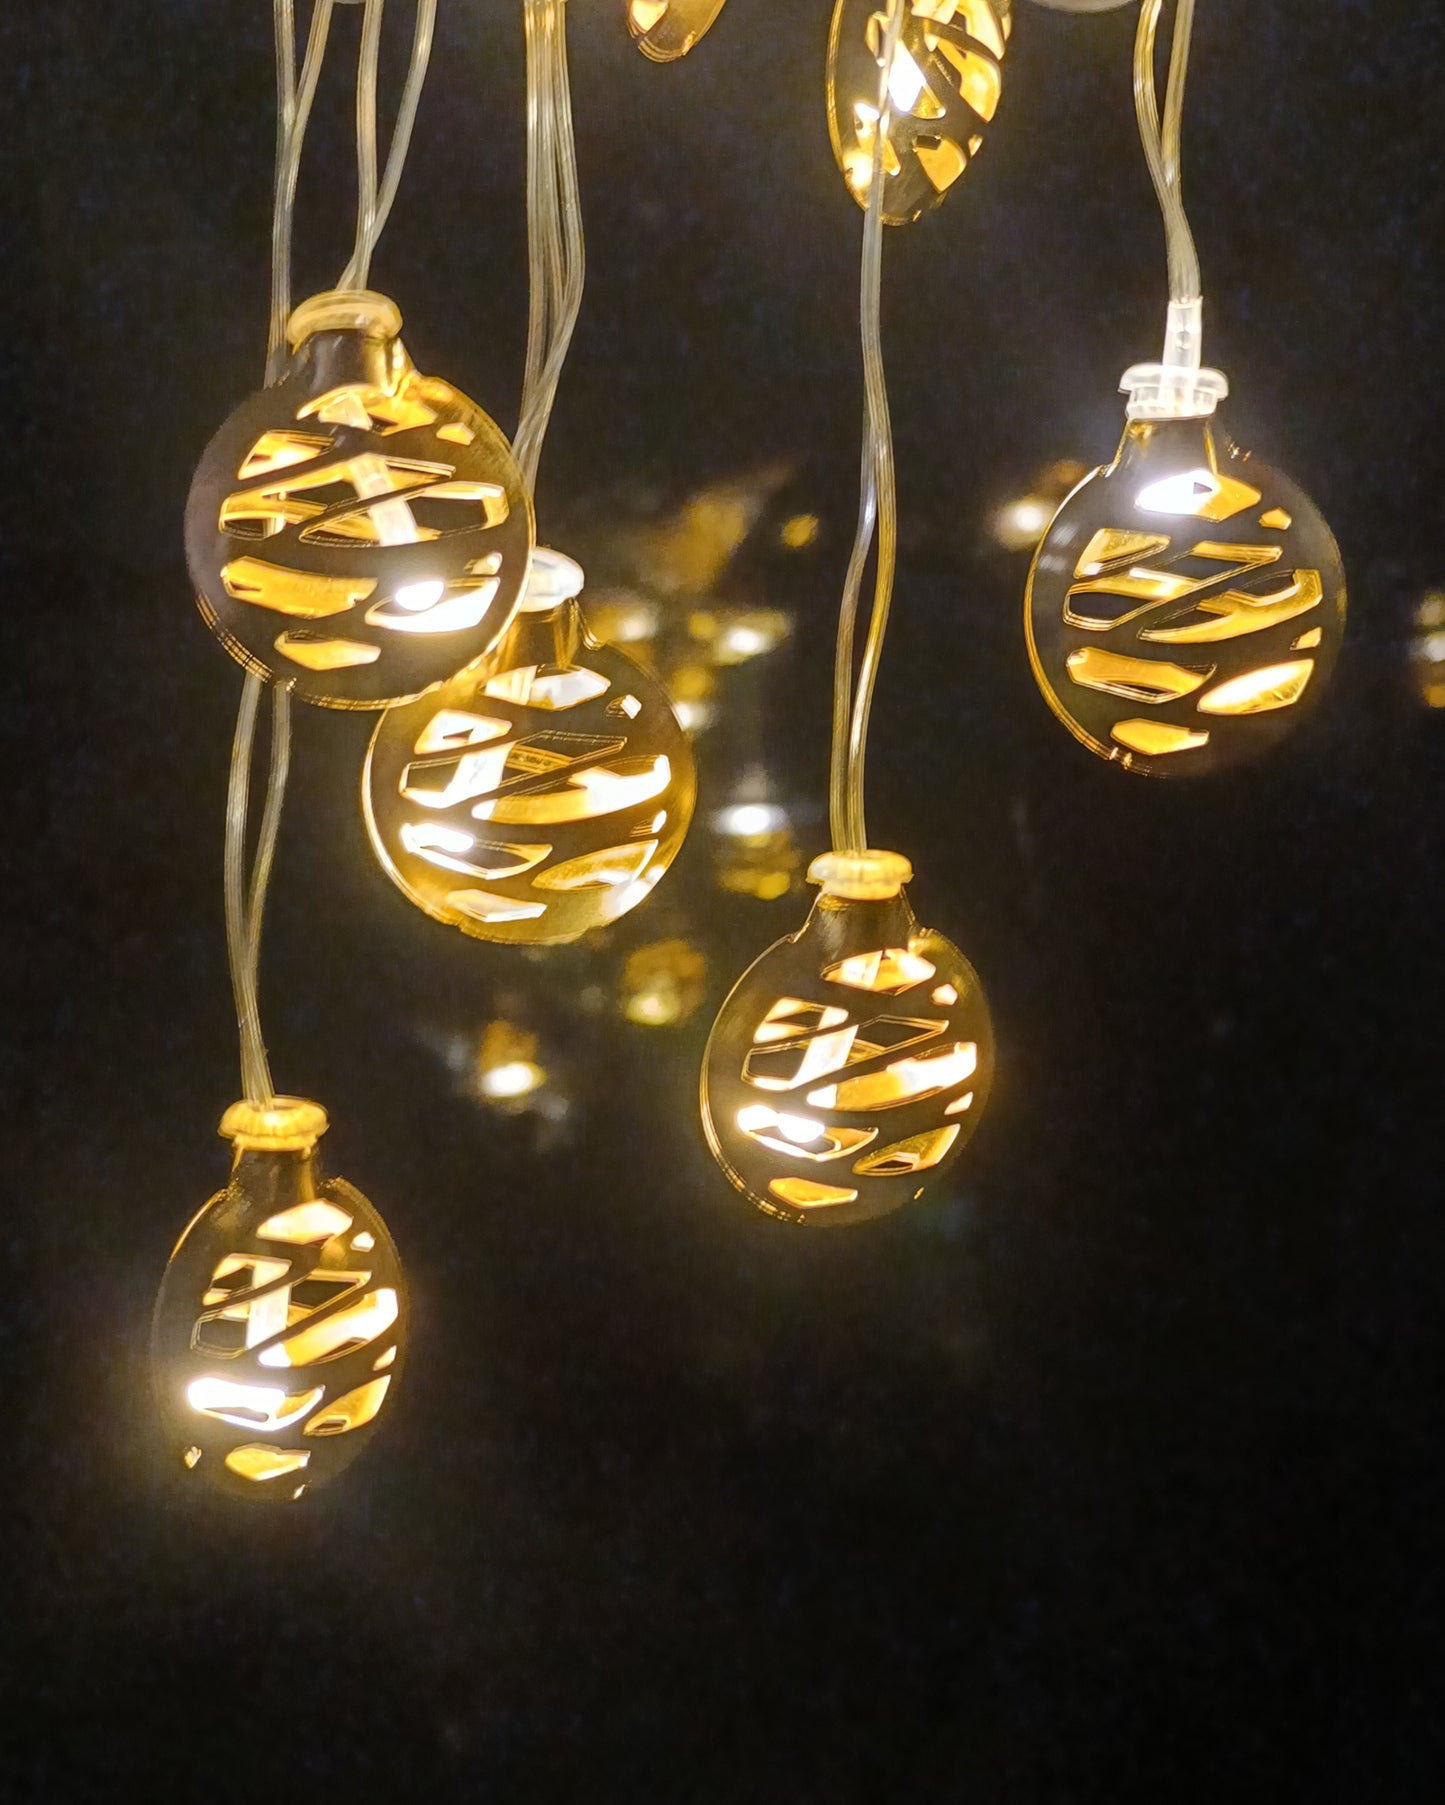 String Lights, Moroccon Copper Lights 5M 14LED Indoor Outdoor Fairy Globe String Lights,for Garden,Diwali,Christmas,Wedding,Home, Party Decoration (Warm White), Golden Flat Round